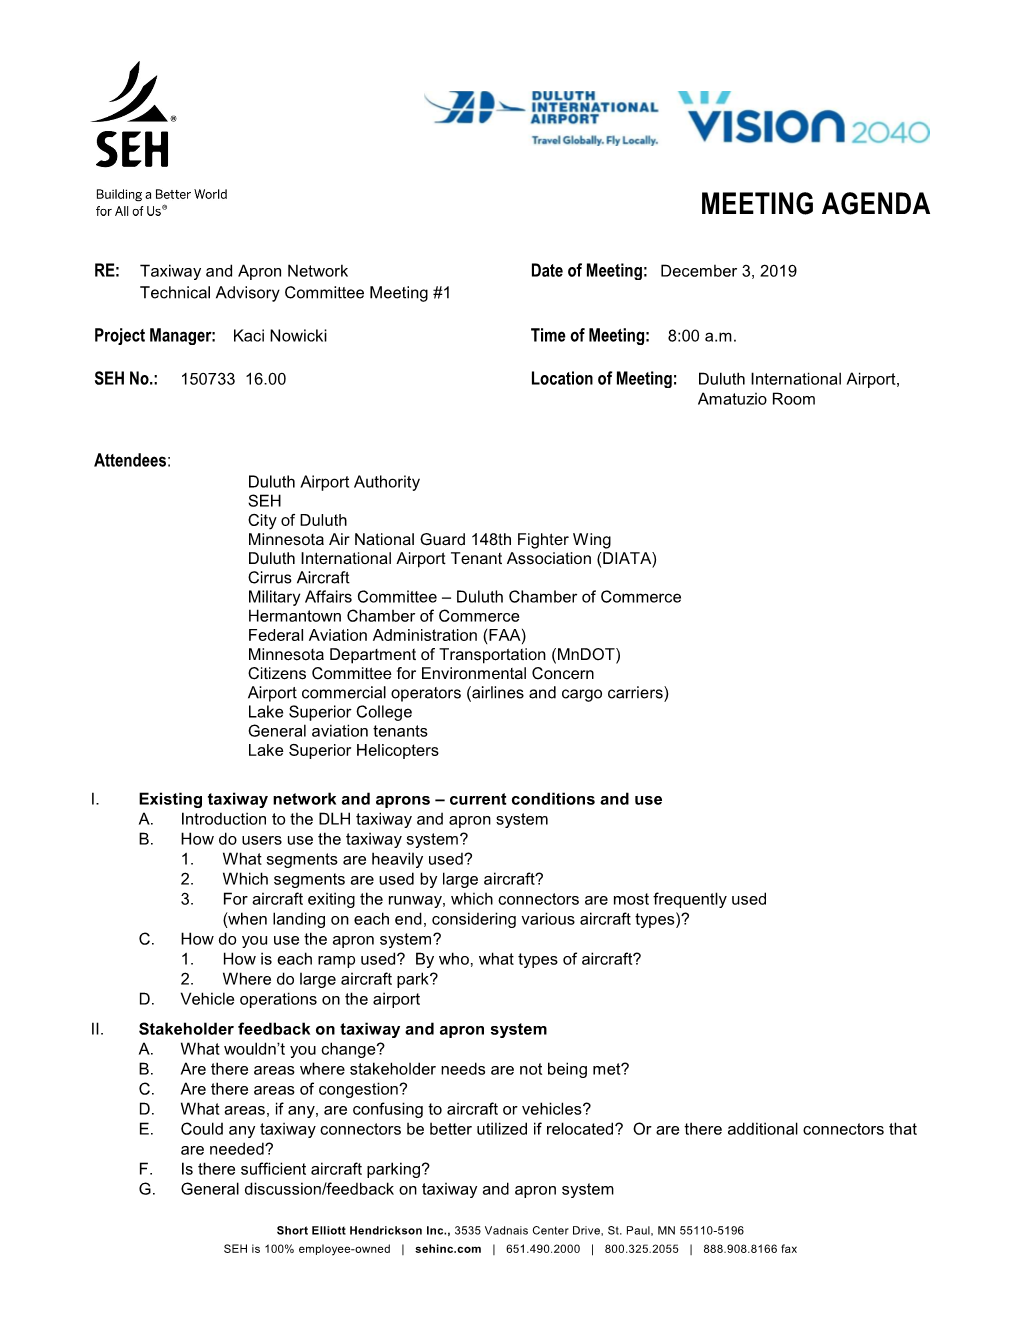 Taxiway TAC Meeting #1 Agenda and Meeting Packet